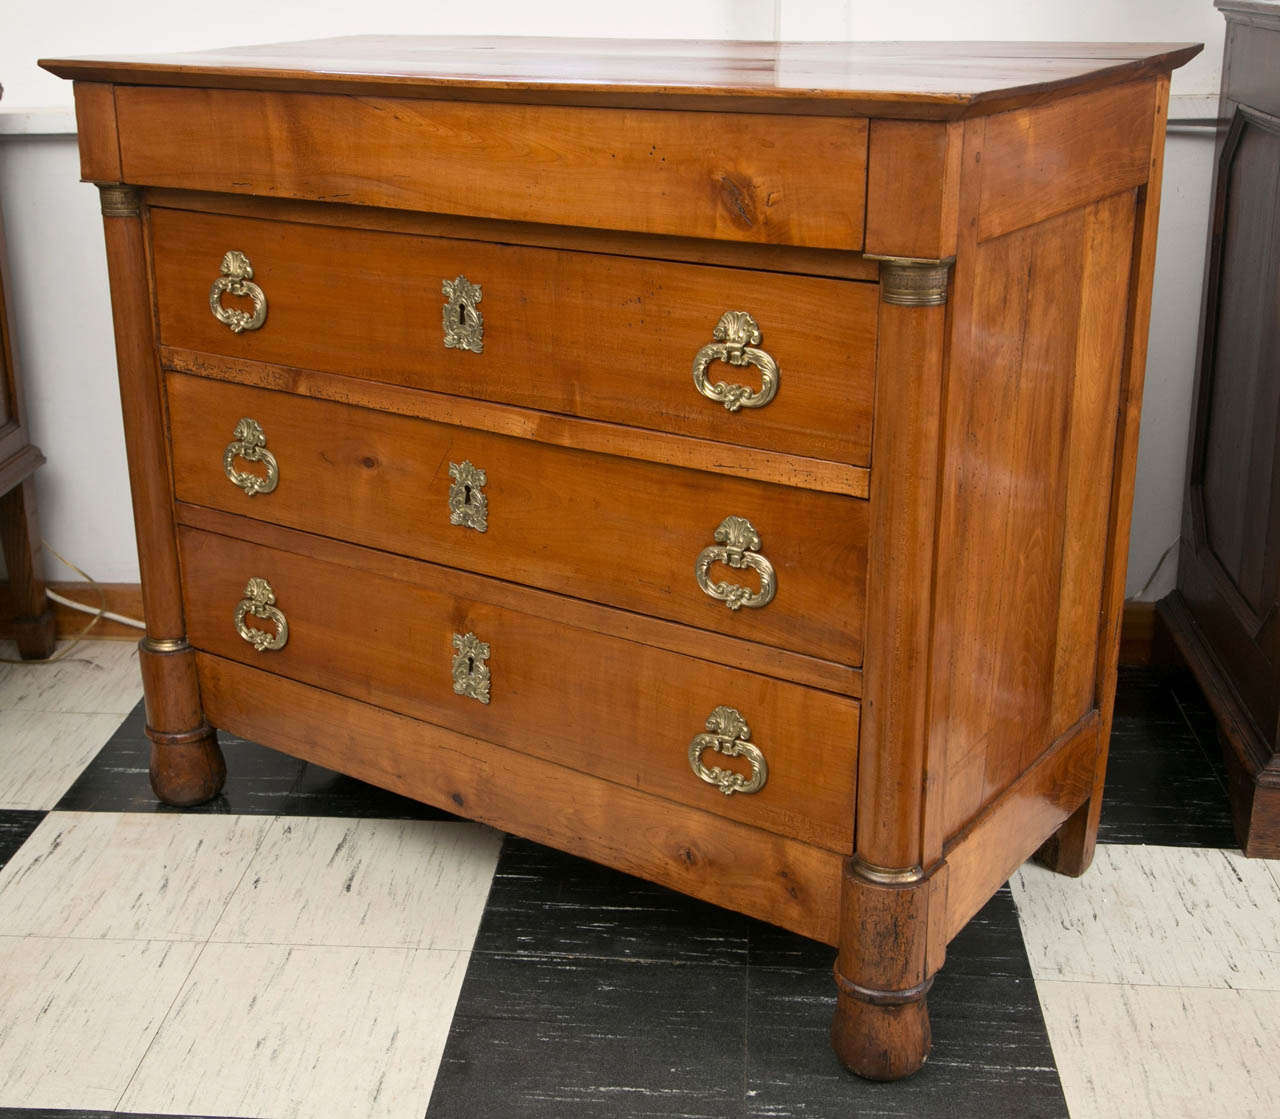 This cherrywood commode has something unusual besides its wood, it has its original bronze hardware. In classic Empire form with brass-mounted columnar sides and a “hidden” top drawer, this chest exhibits an extraordinary patina to go with its overt